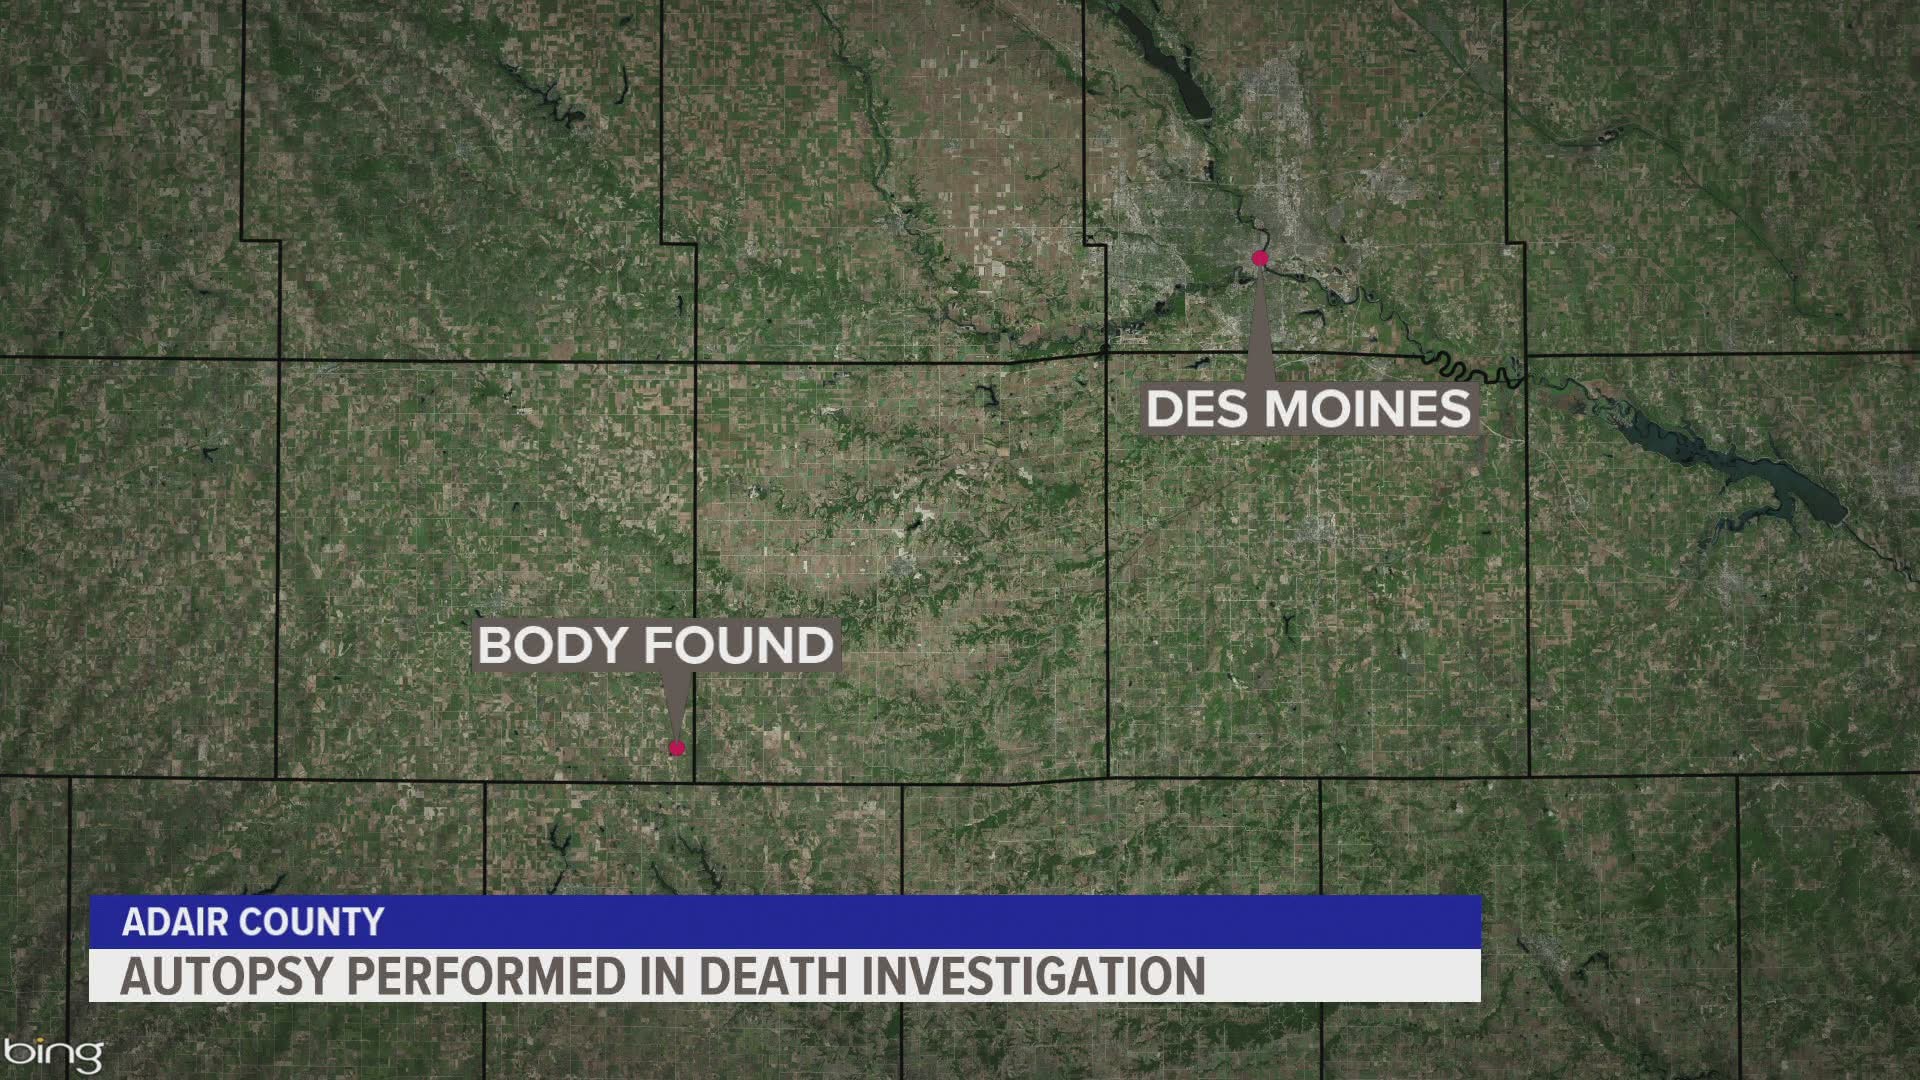 The Iowa Department of Public Safety says an autopsy was conducted on the body found Thursday.